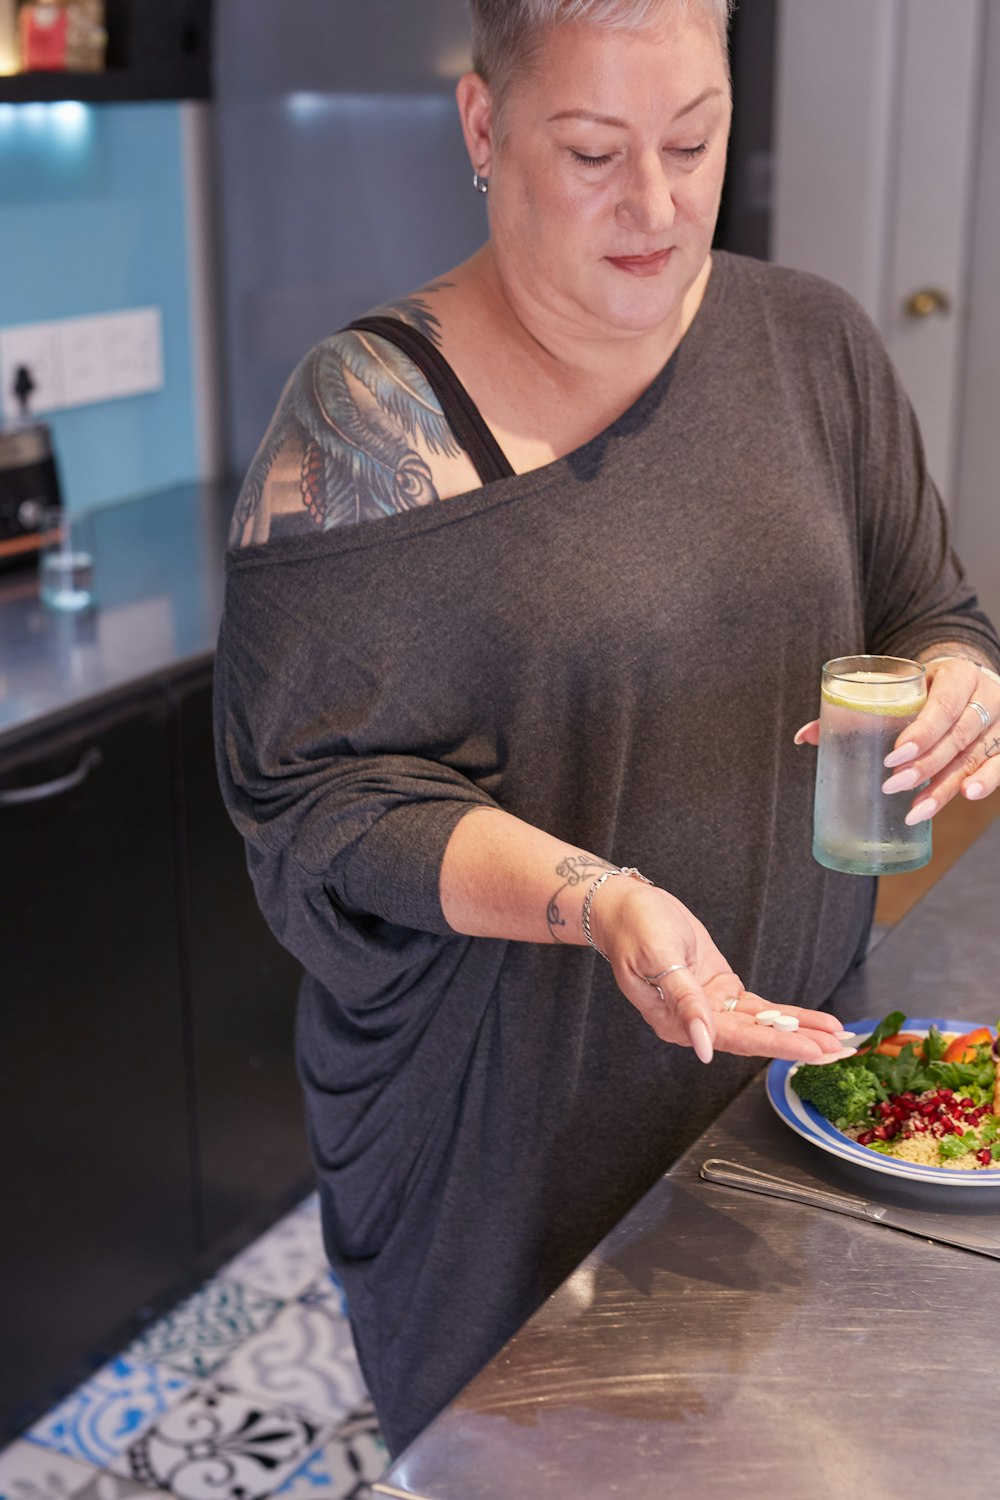 a woman holding a glass of water and a plate of food